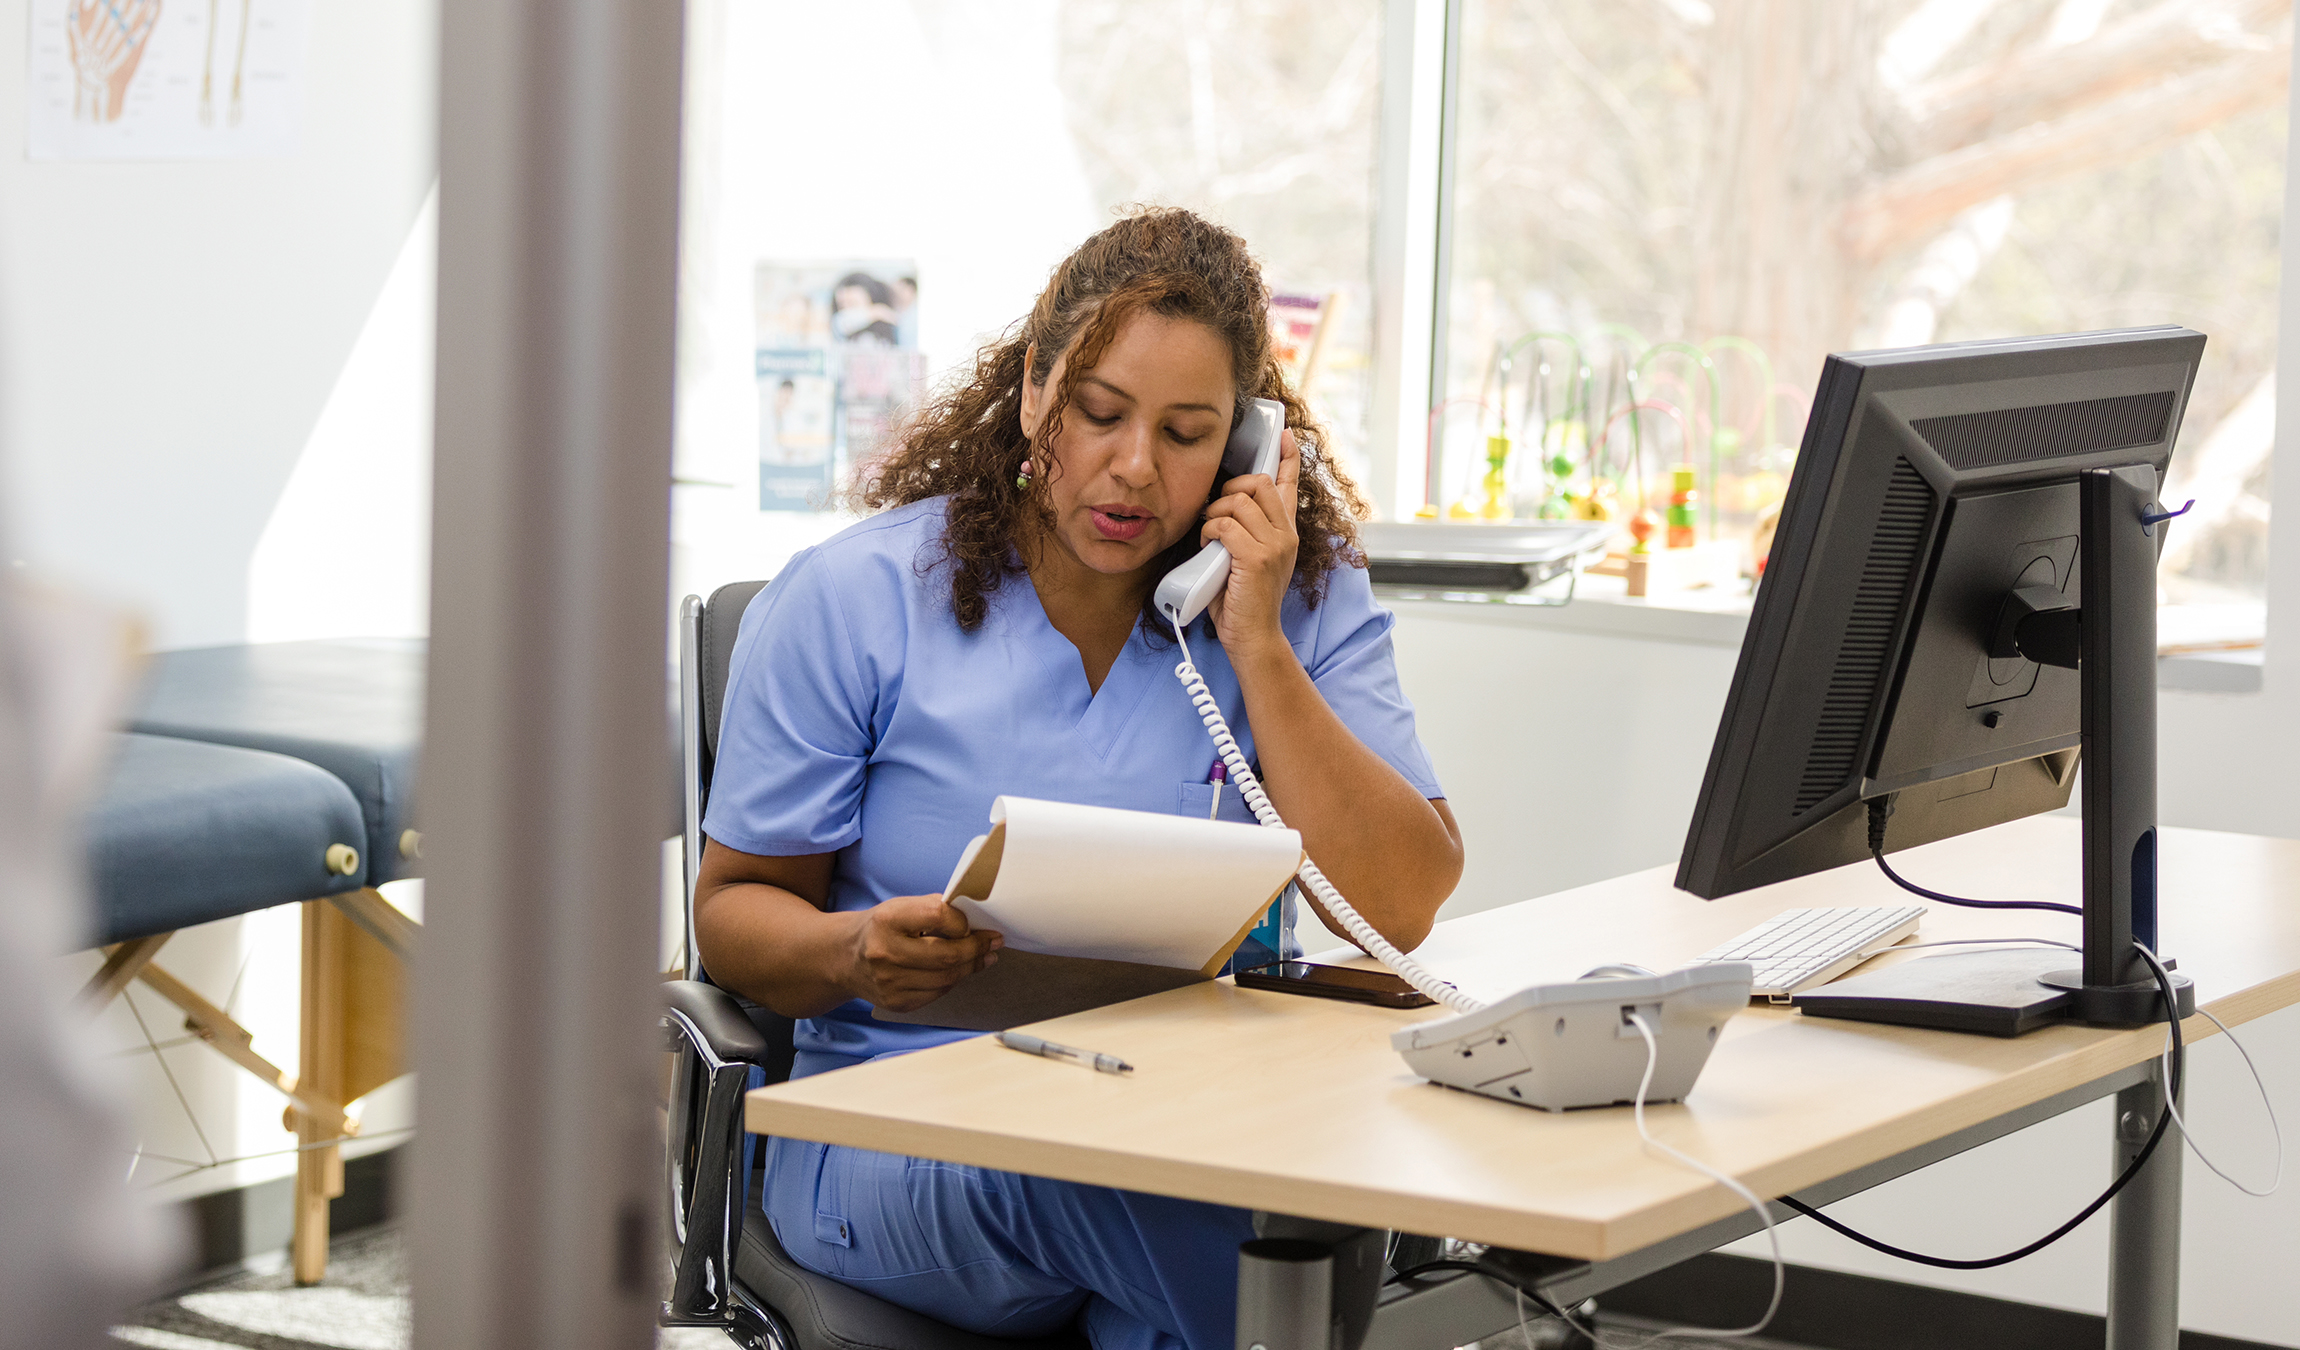 provider Makes Patient Calls to hennepin connect for a patient transfer consult, patient transfers and consultations, one call medical, medical connect, medical referral, medical referrals, hennepin connect, transfer patient from hospital